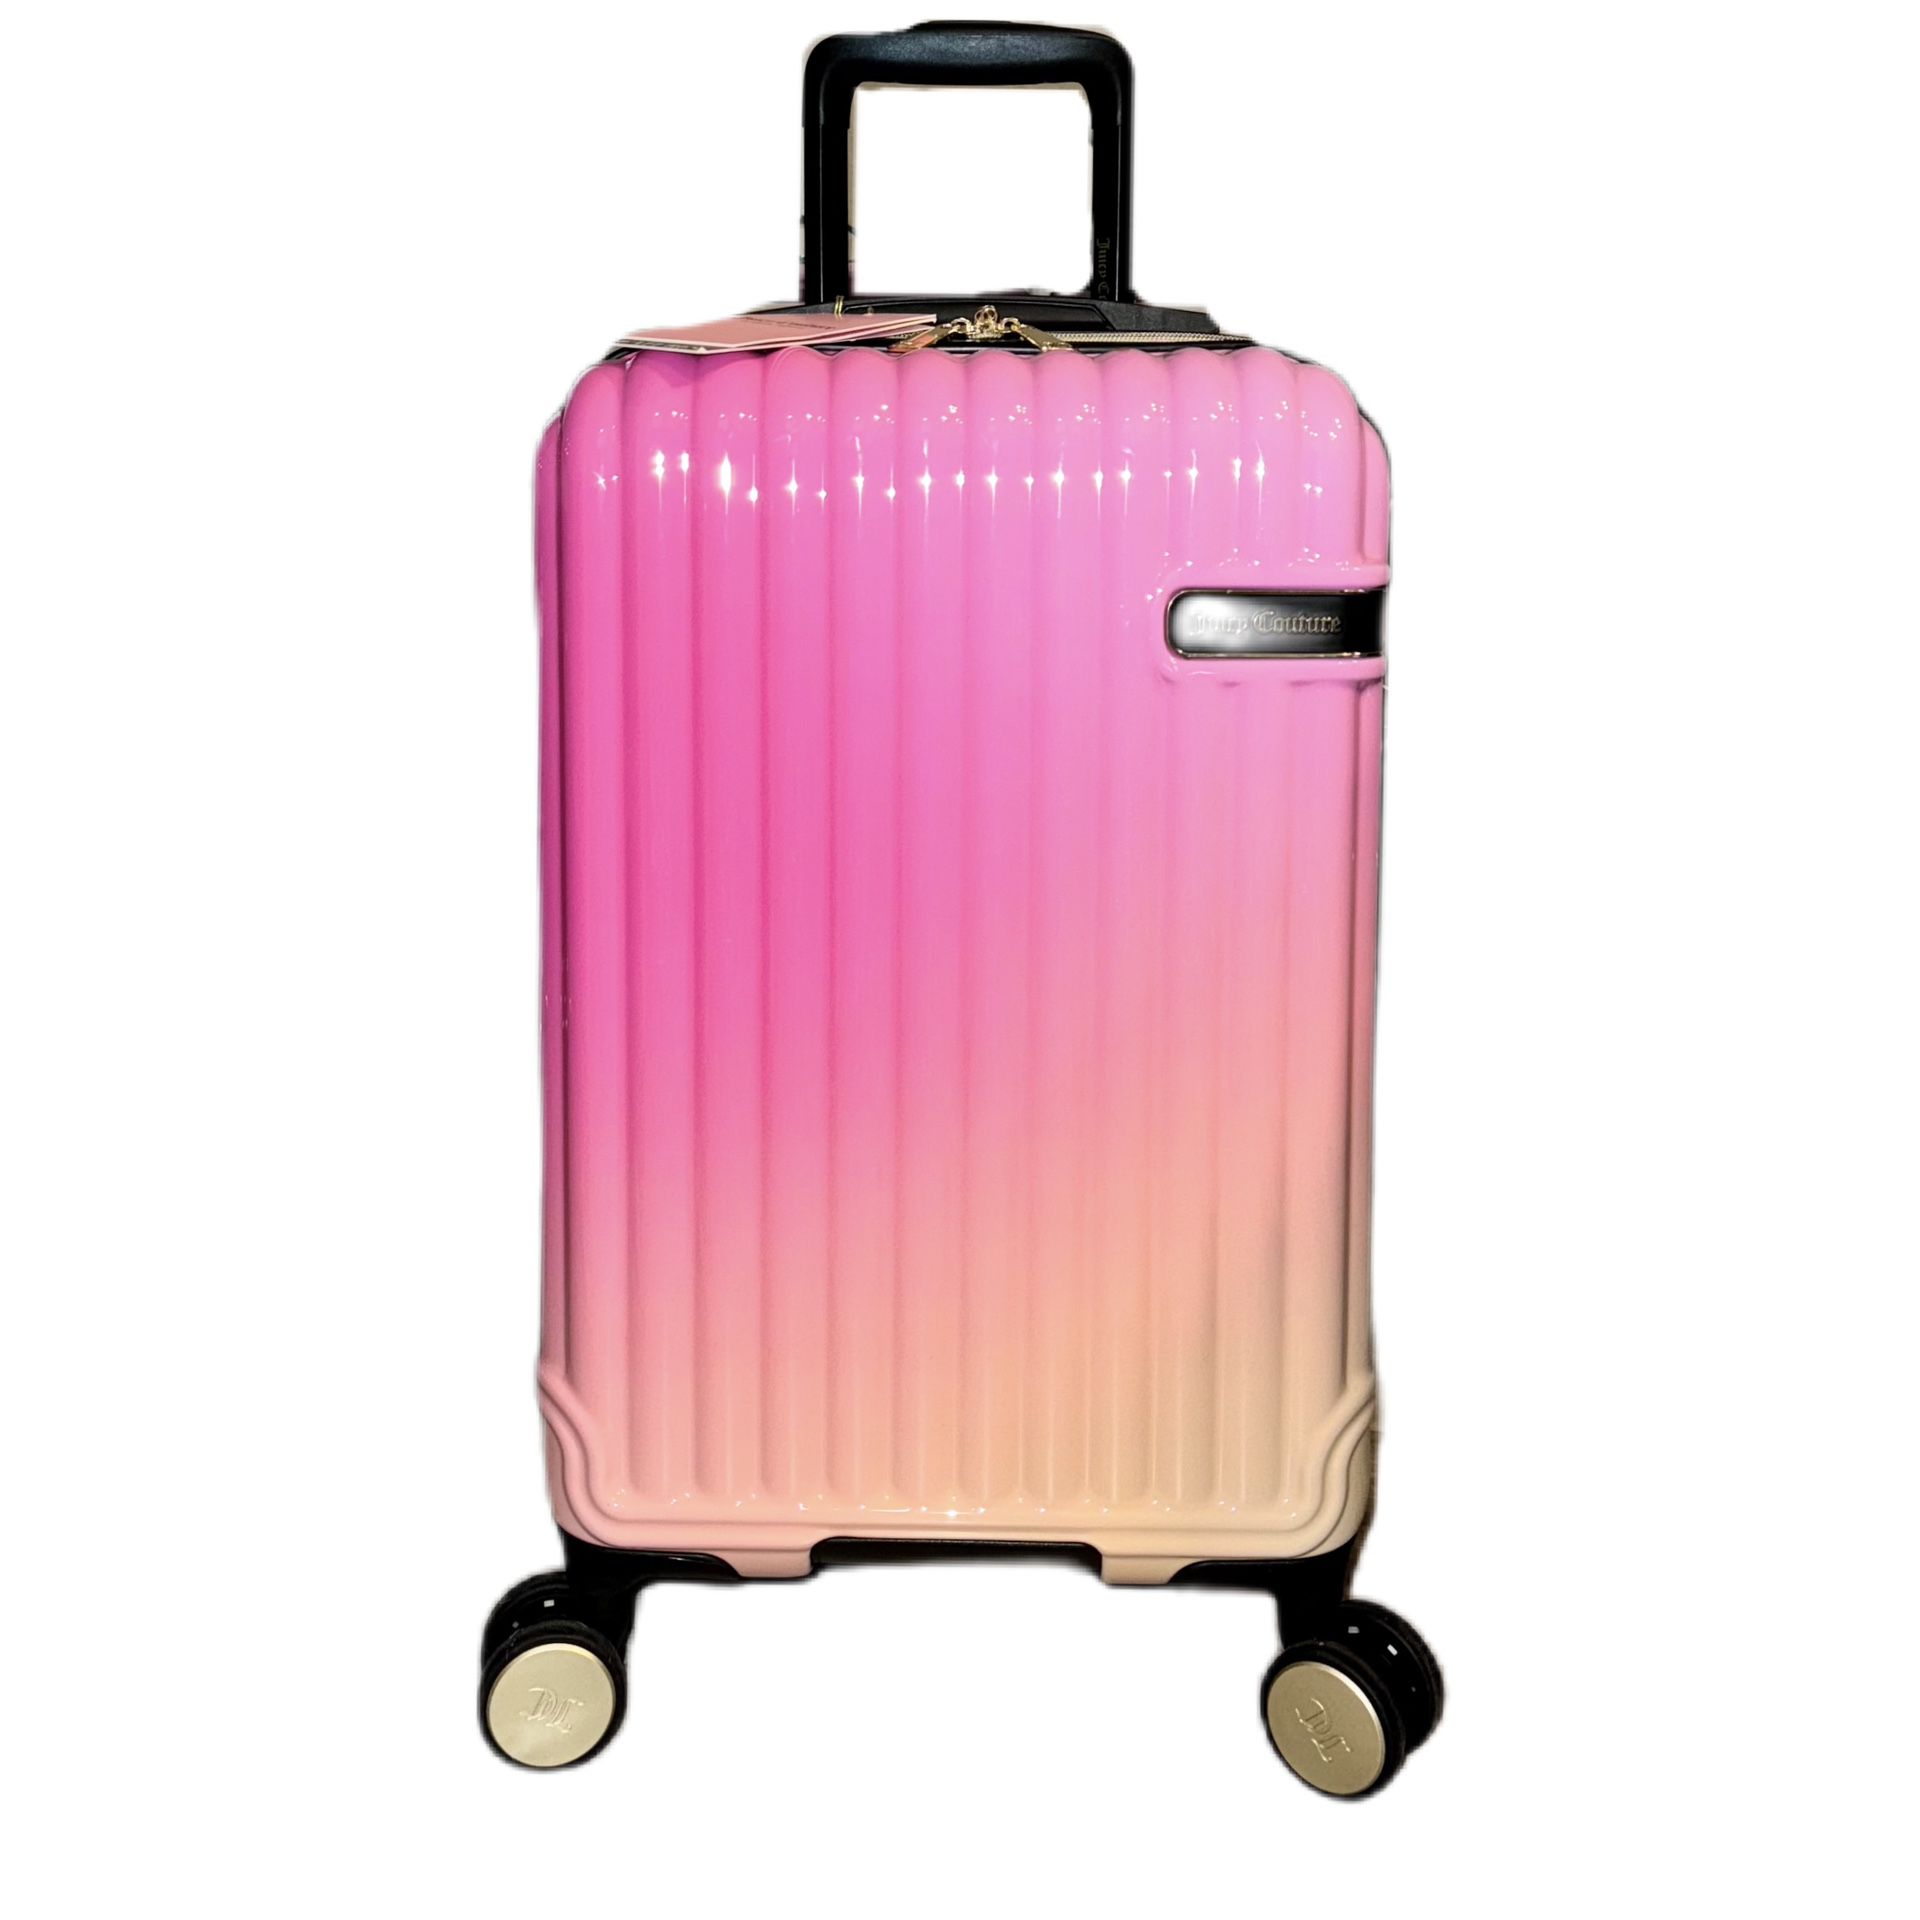 Juicy Couture Pink Ombre 21” Carry On Luggage Hard Side Spinner Suitcase Travel